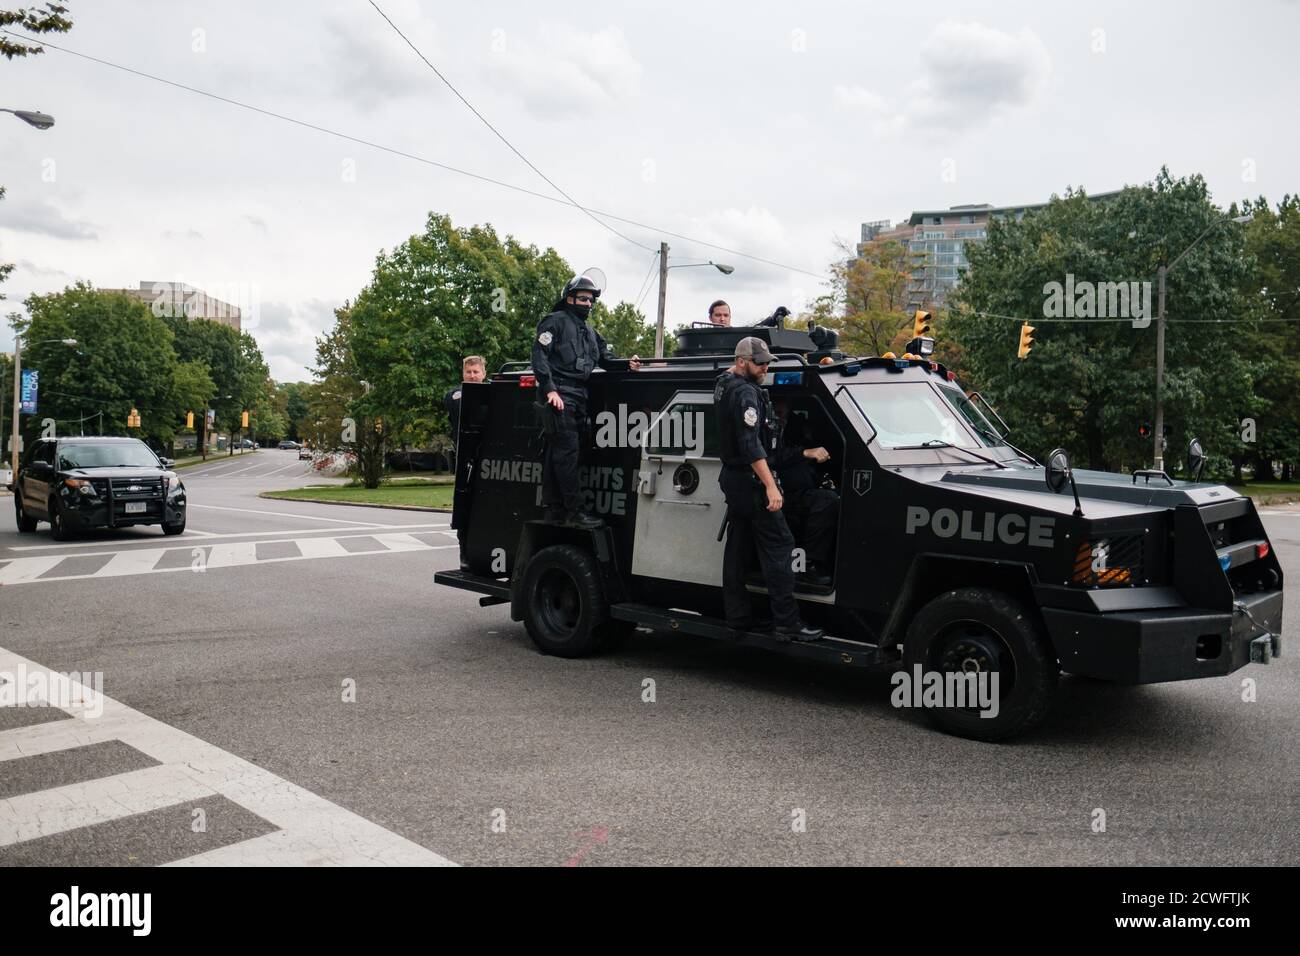 Cleveland, Ohio, USA. 29th Sep, 2020. Shaker Heights Police ride an emergency response vehicle during the first Presidential Debate held in Cleveland, Wednesday, September 30, 2020. Credit: Andrew Dolph/ZUMA Wire/Alamy Live News Stock Photo